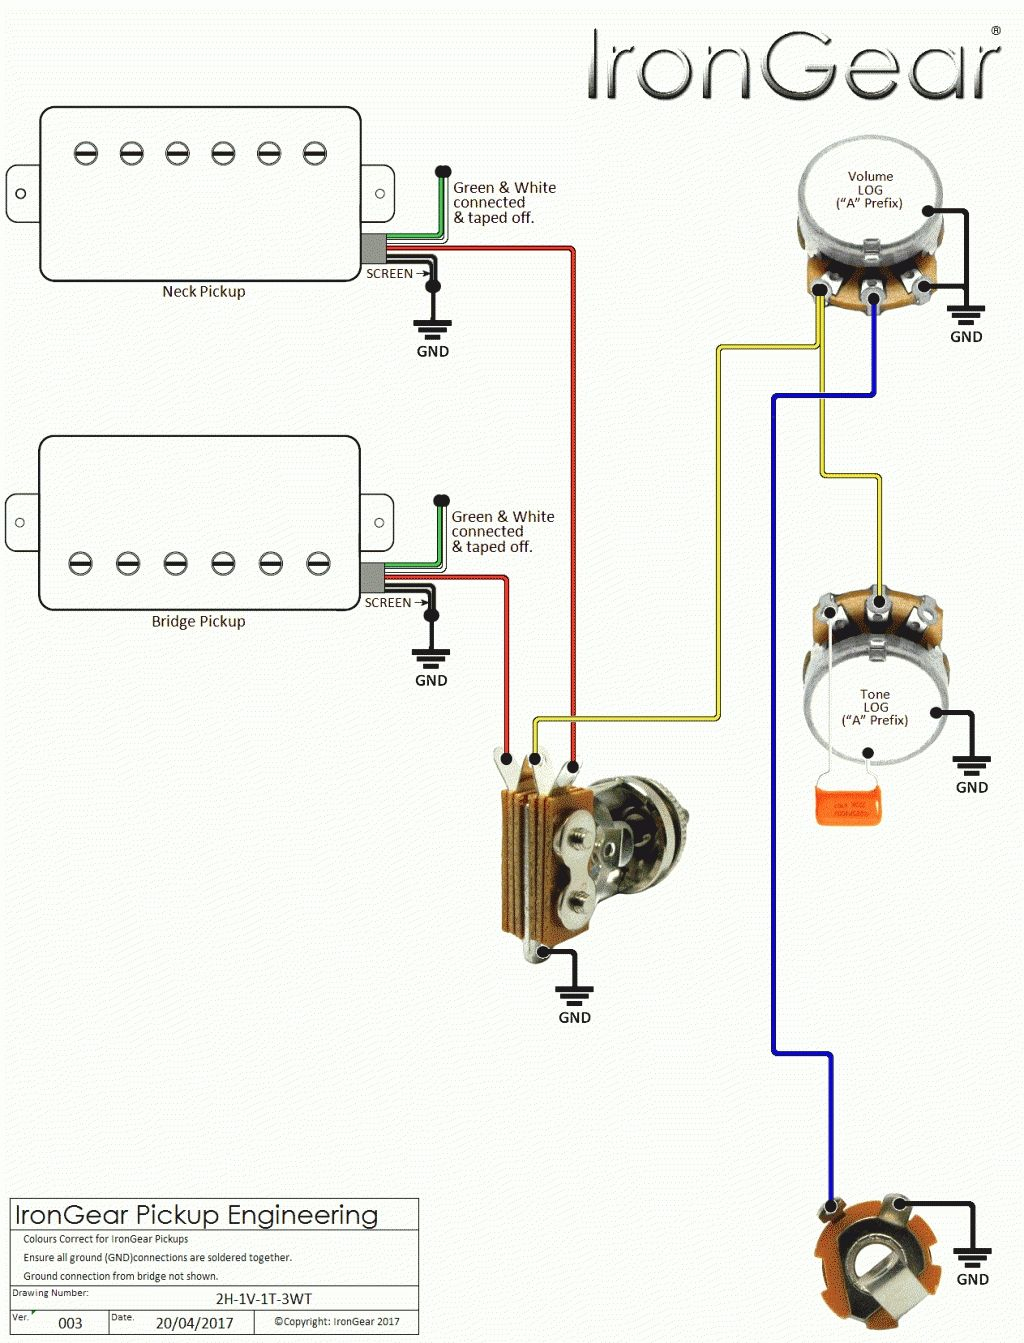 Wiring-Diagram-For-Electric-Bass-Guitar &amp; P Bass Wiring Diagram - P Bass Wiring Diagram